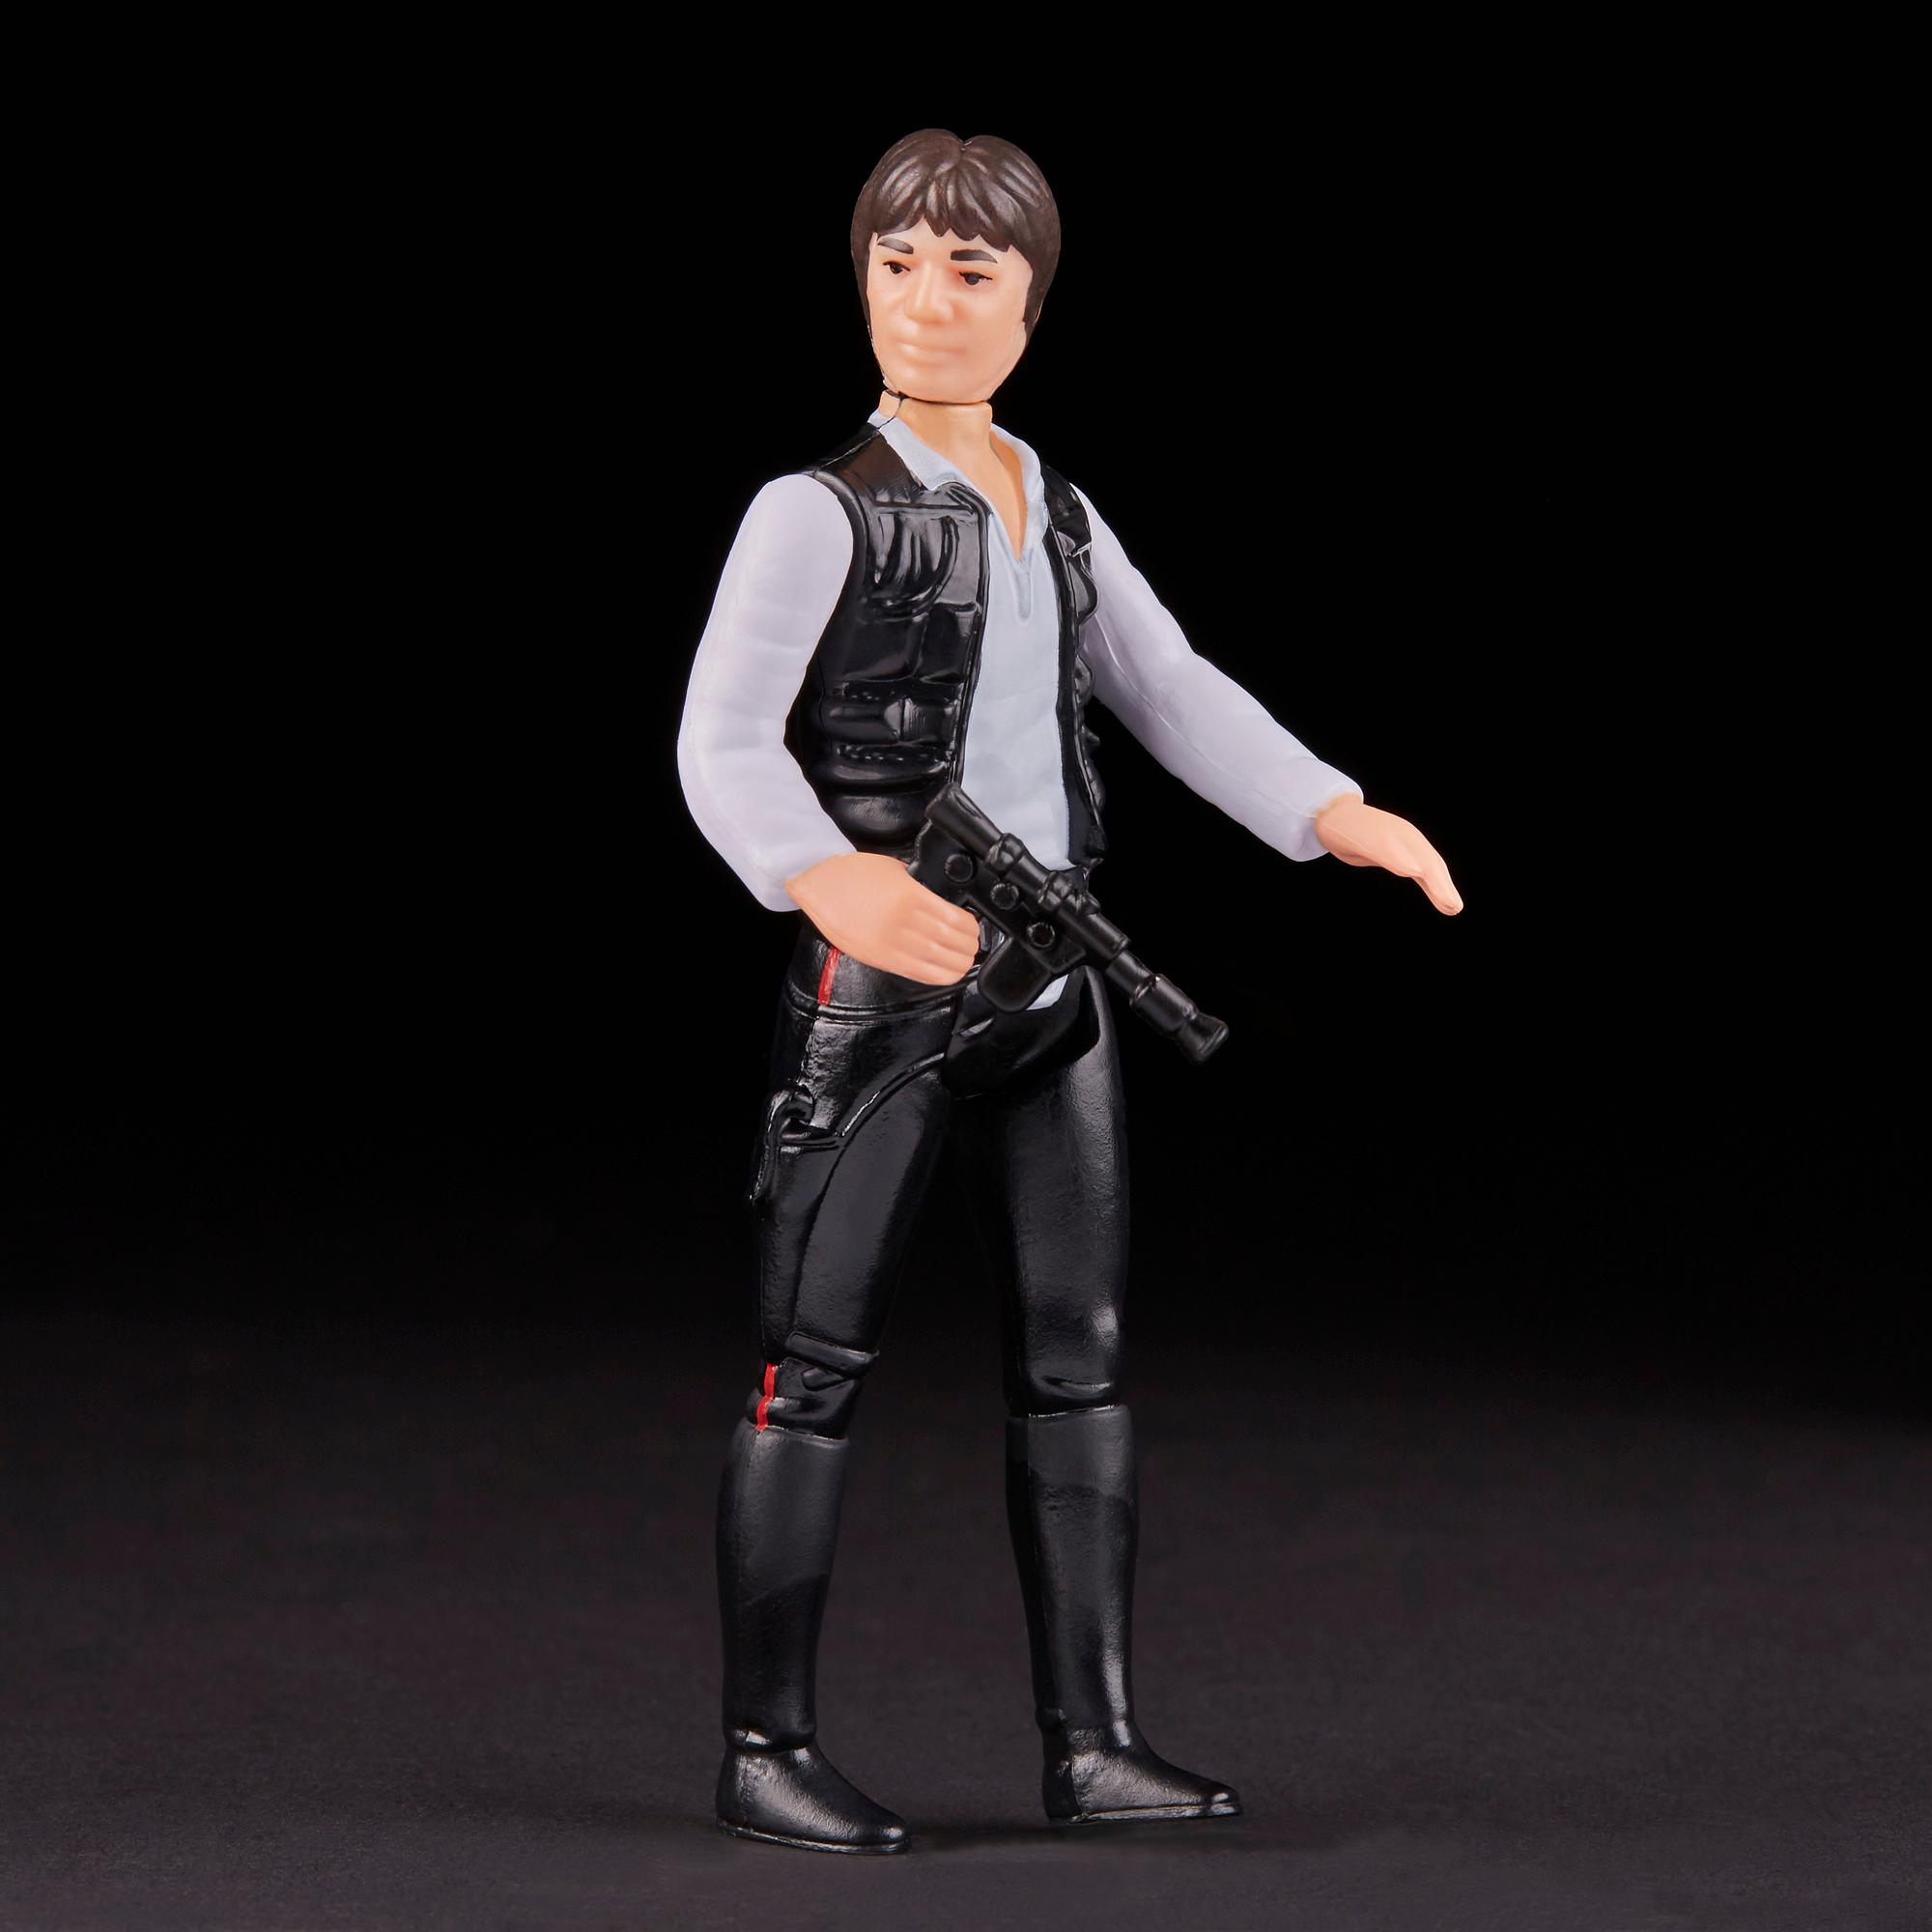 A New Hope Han Solo 3.75-Inch-Scale Action Figure for sale online Hasbro Star Wars Retro Collection Episode IV